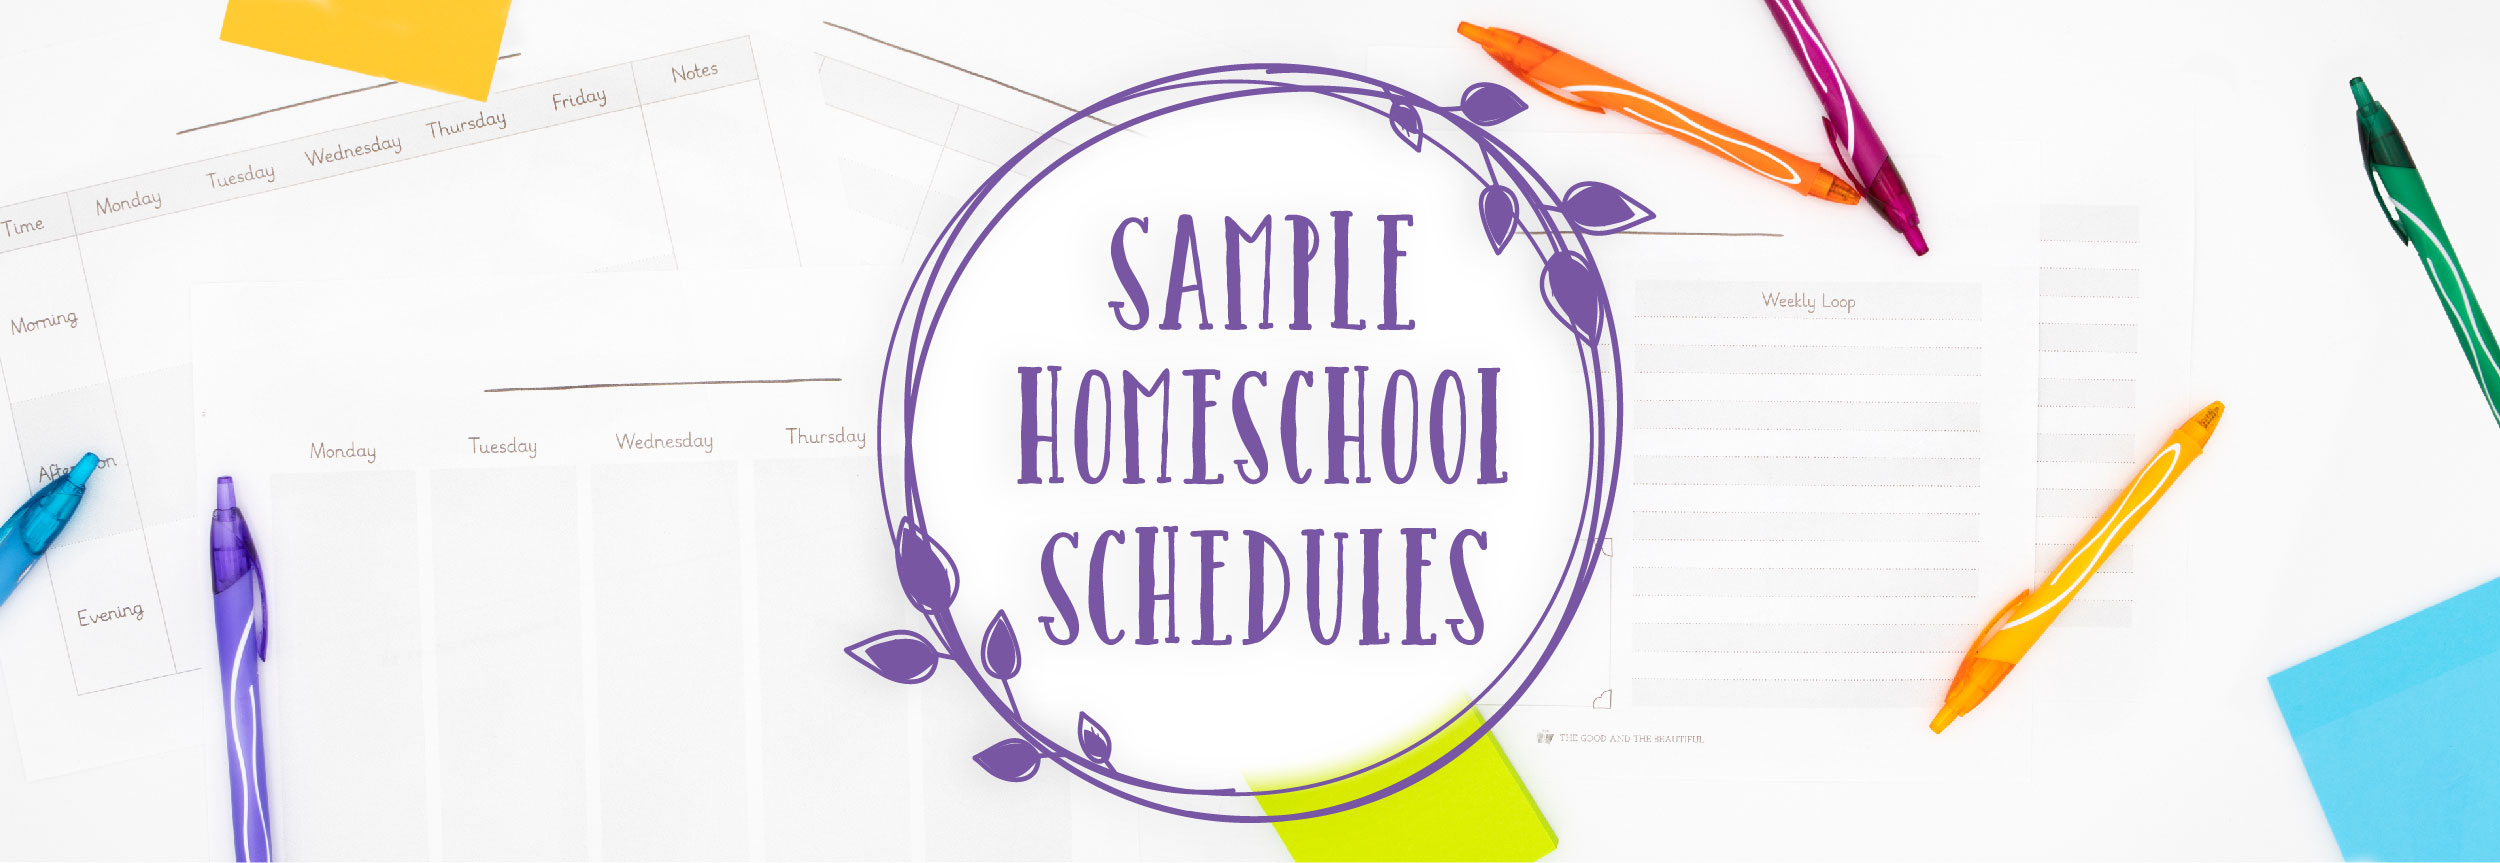 Sample Homeschool Schedules - The Good and the Beautiful